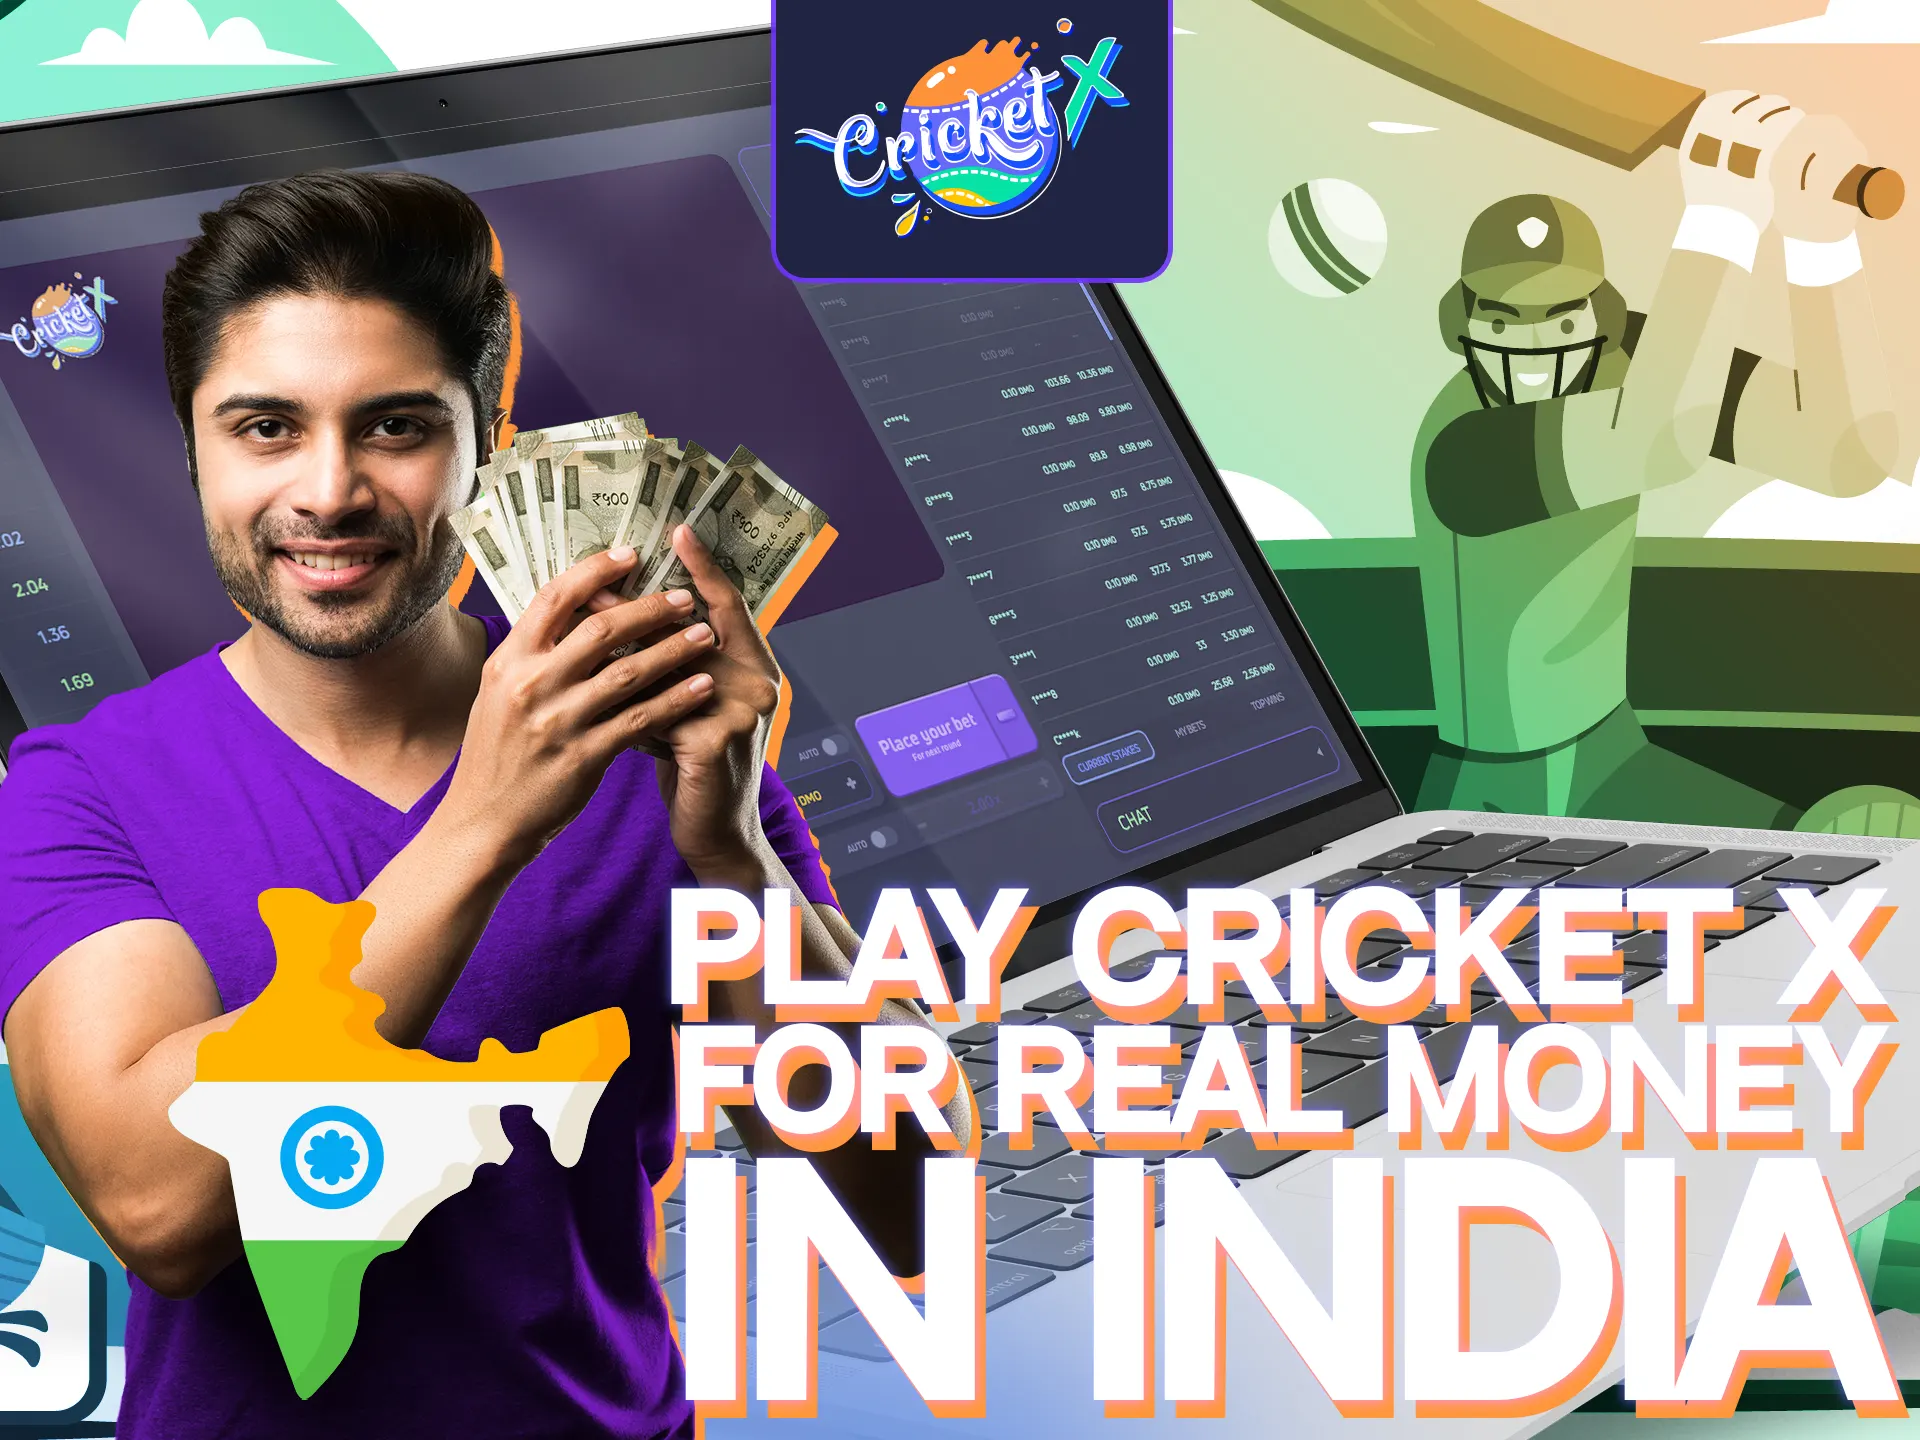 Play for real money at Cricket-X.